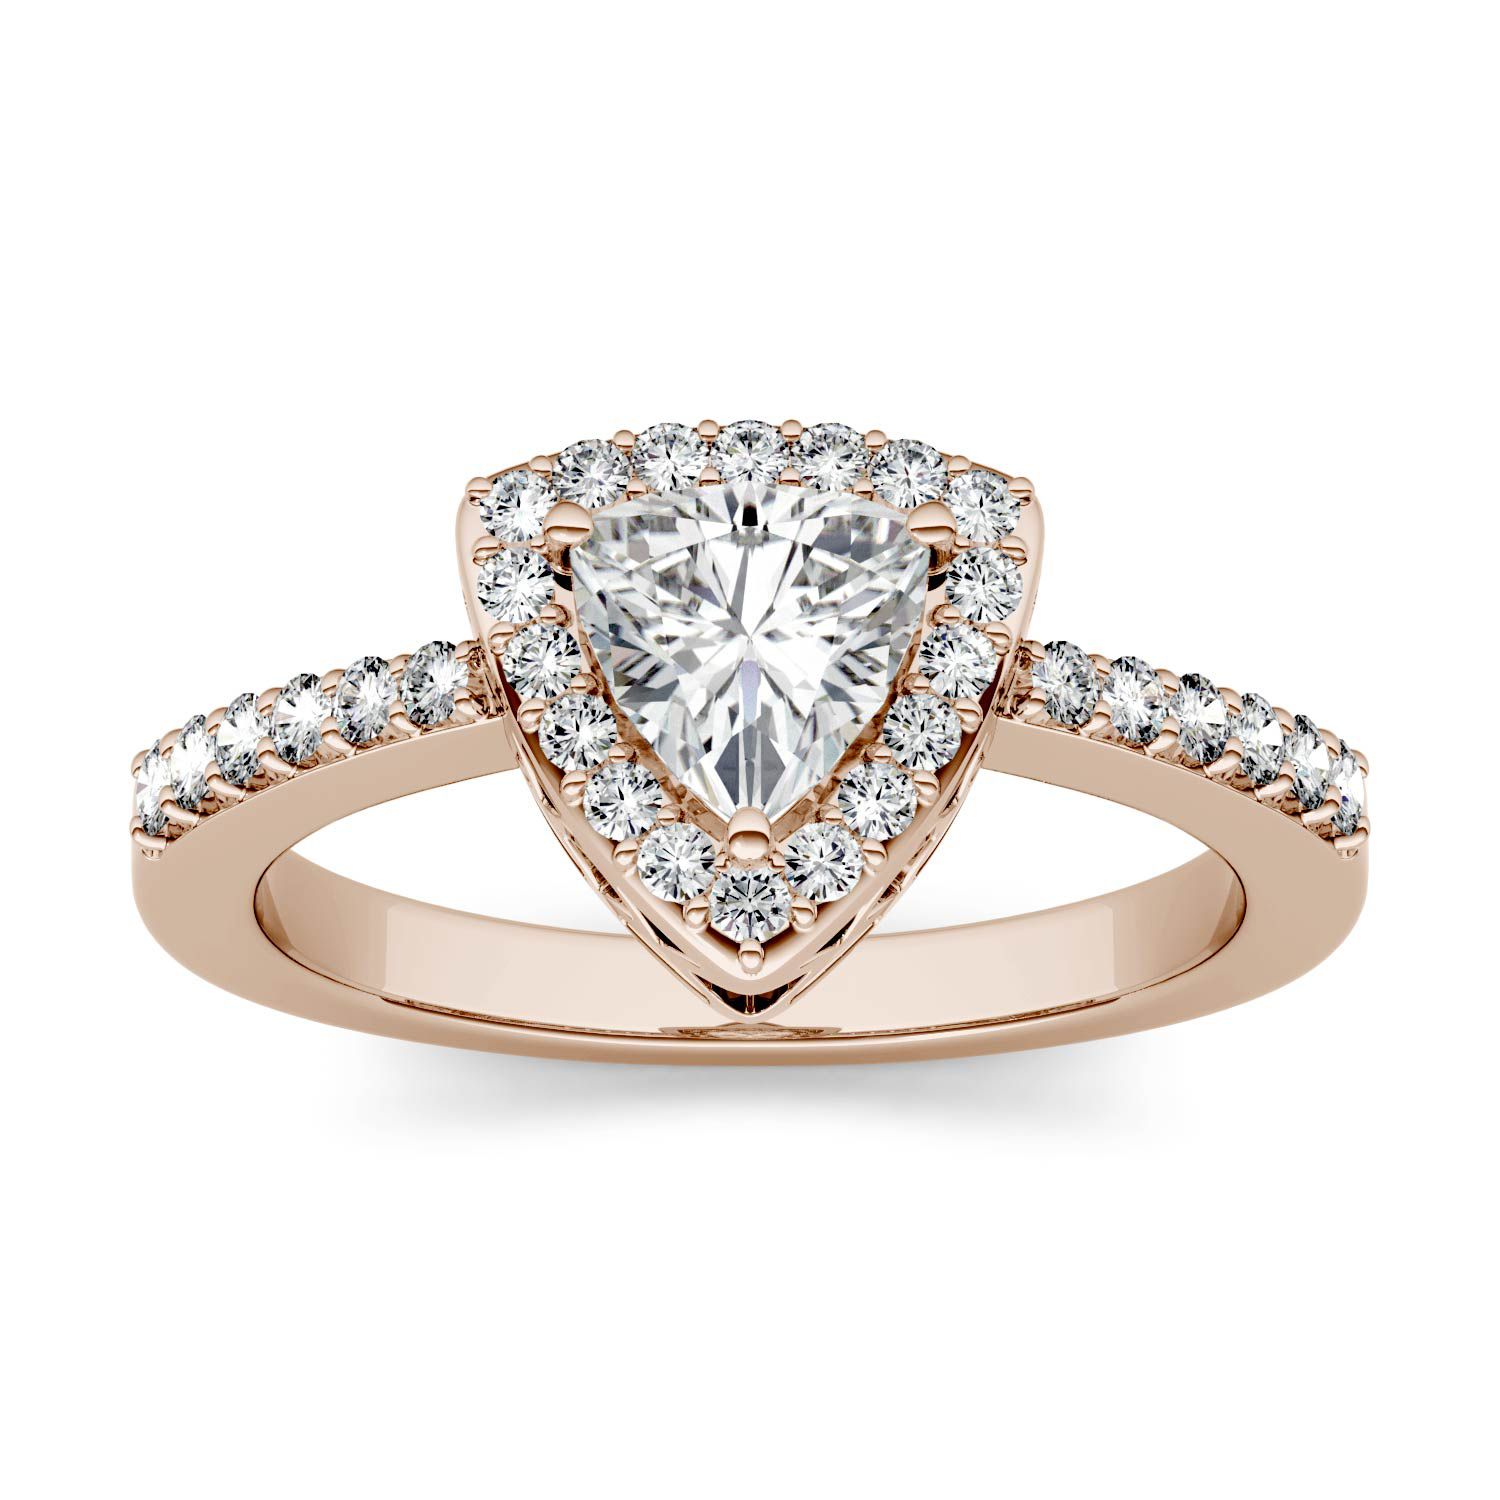 CHARLES & COLVARD: New Shape: Trillion Moissainte Halo With Side Accents Engagement Ring